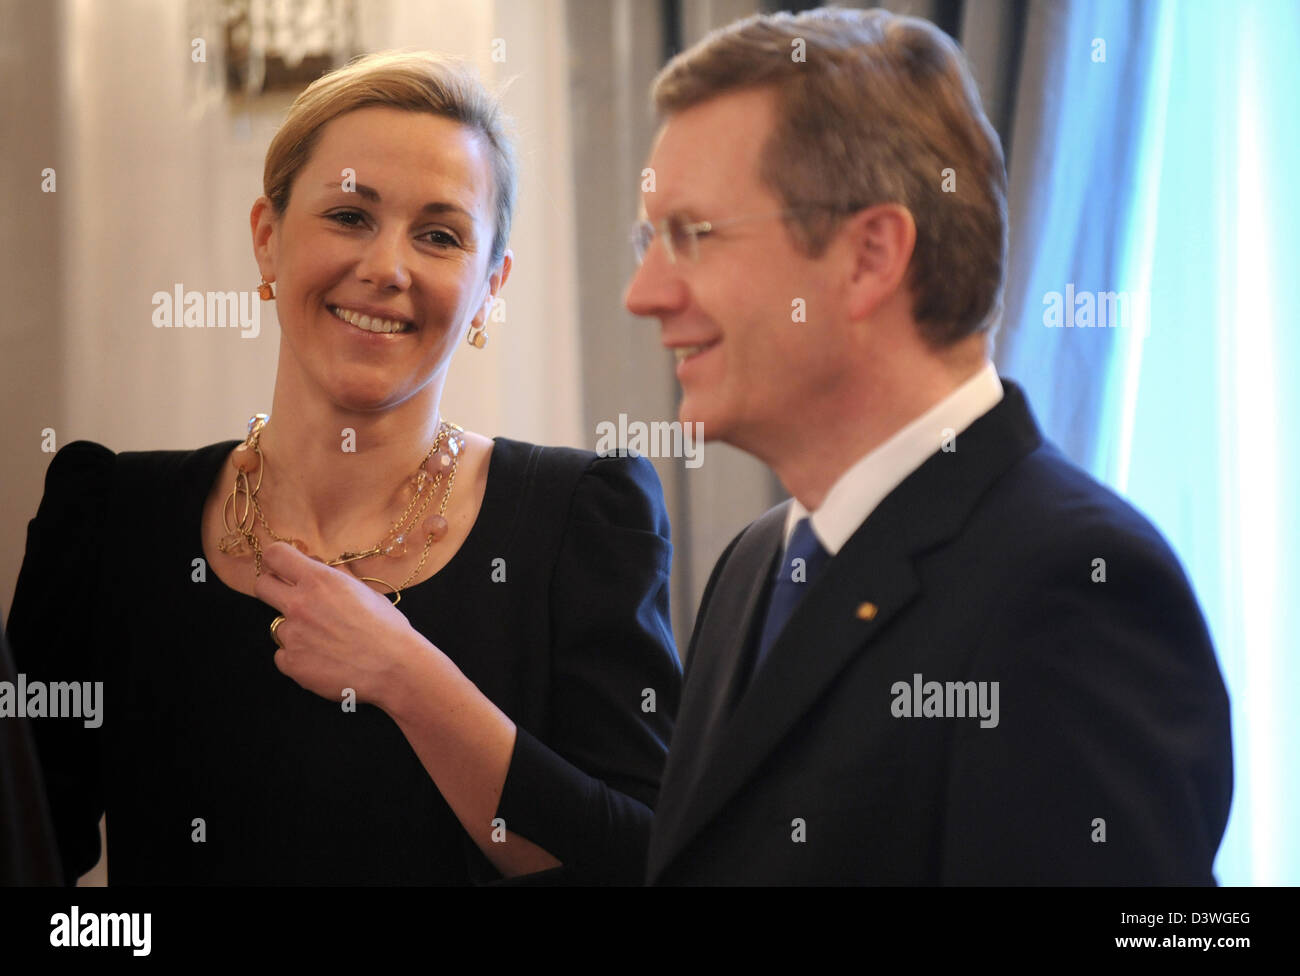 Berlin, Germany, Christian Wulff, CDU, and his wife Bettina Wulff during the New Year Reception Stock Photo